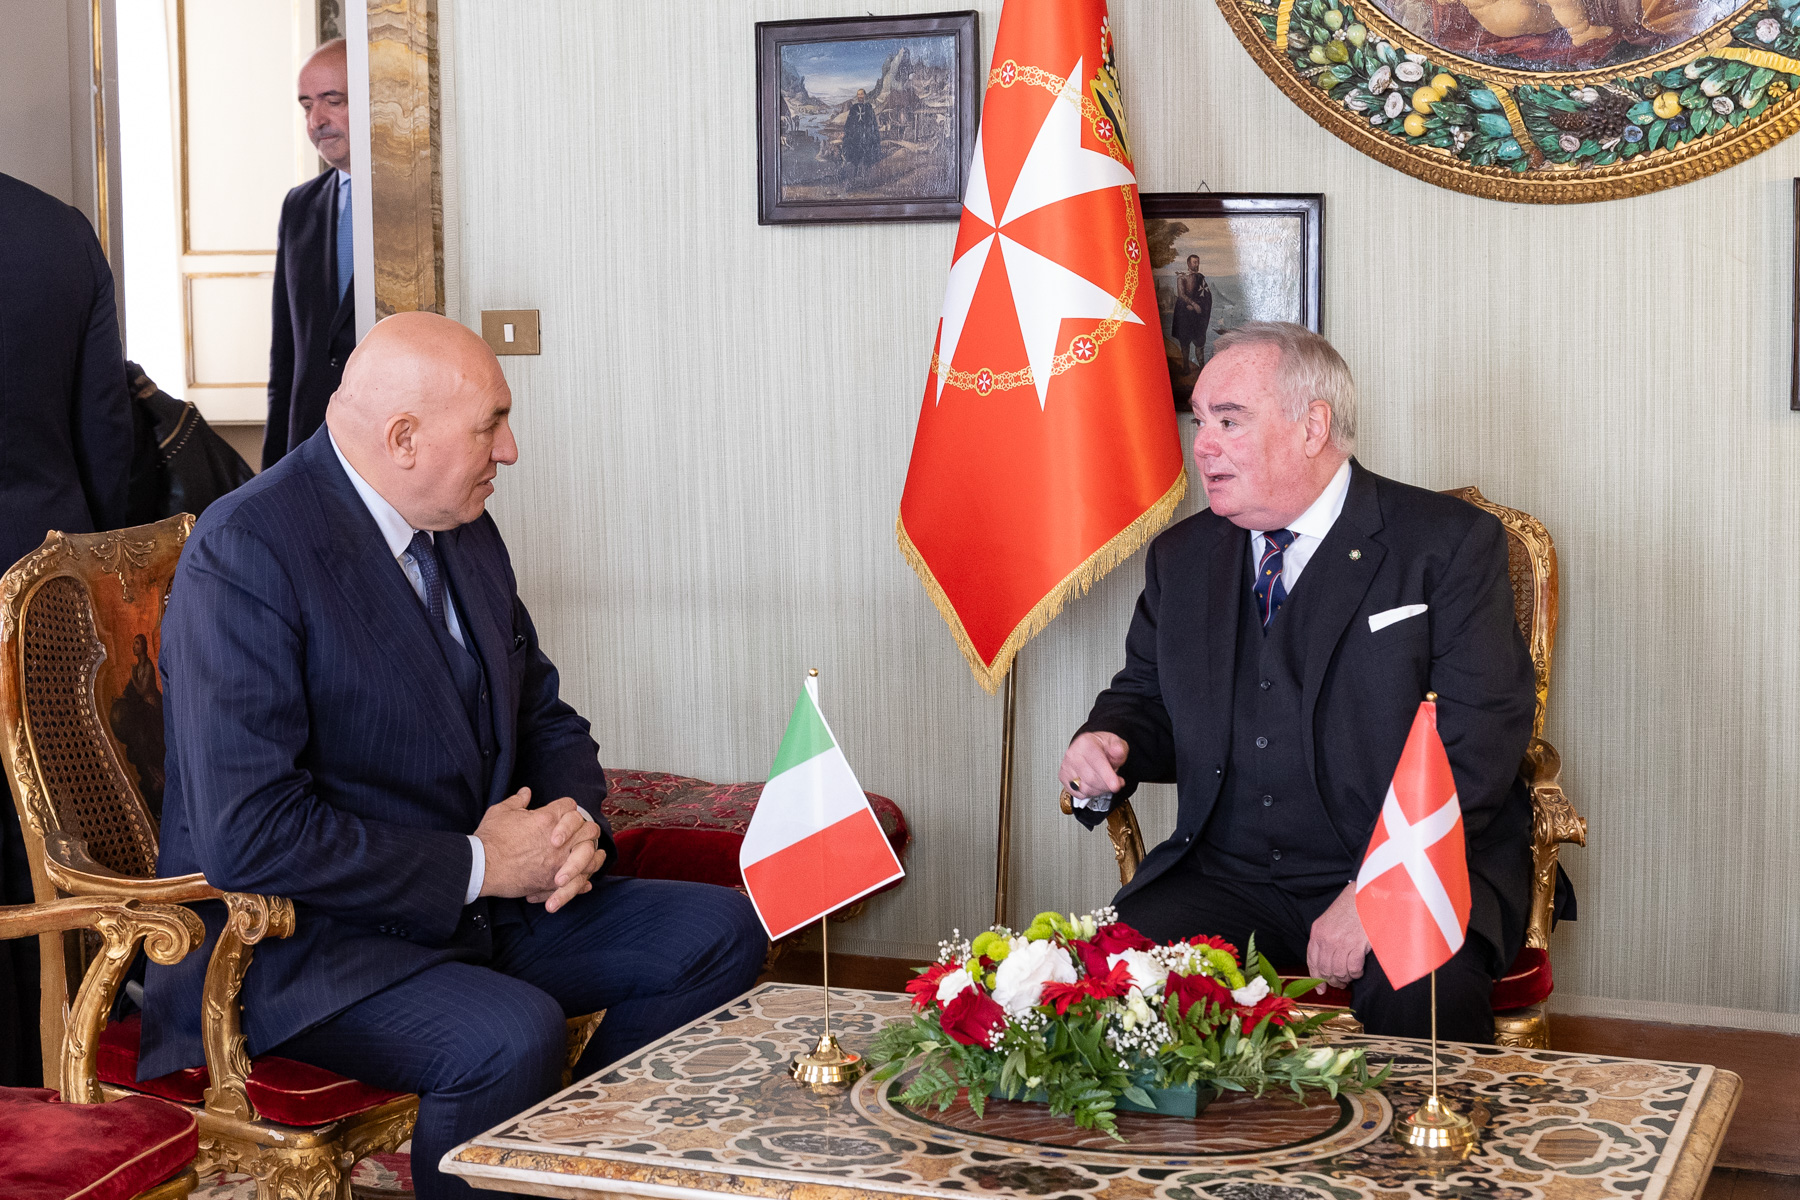 Italian Minister of Defence received by Order of Malta’s Grand Master